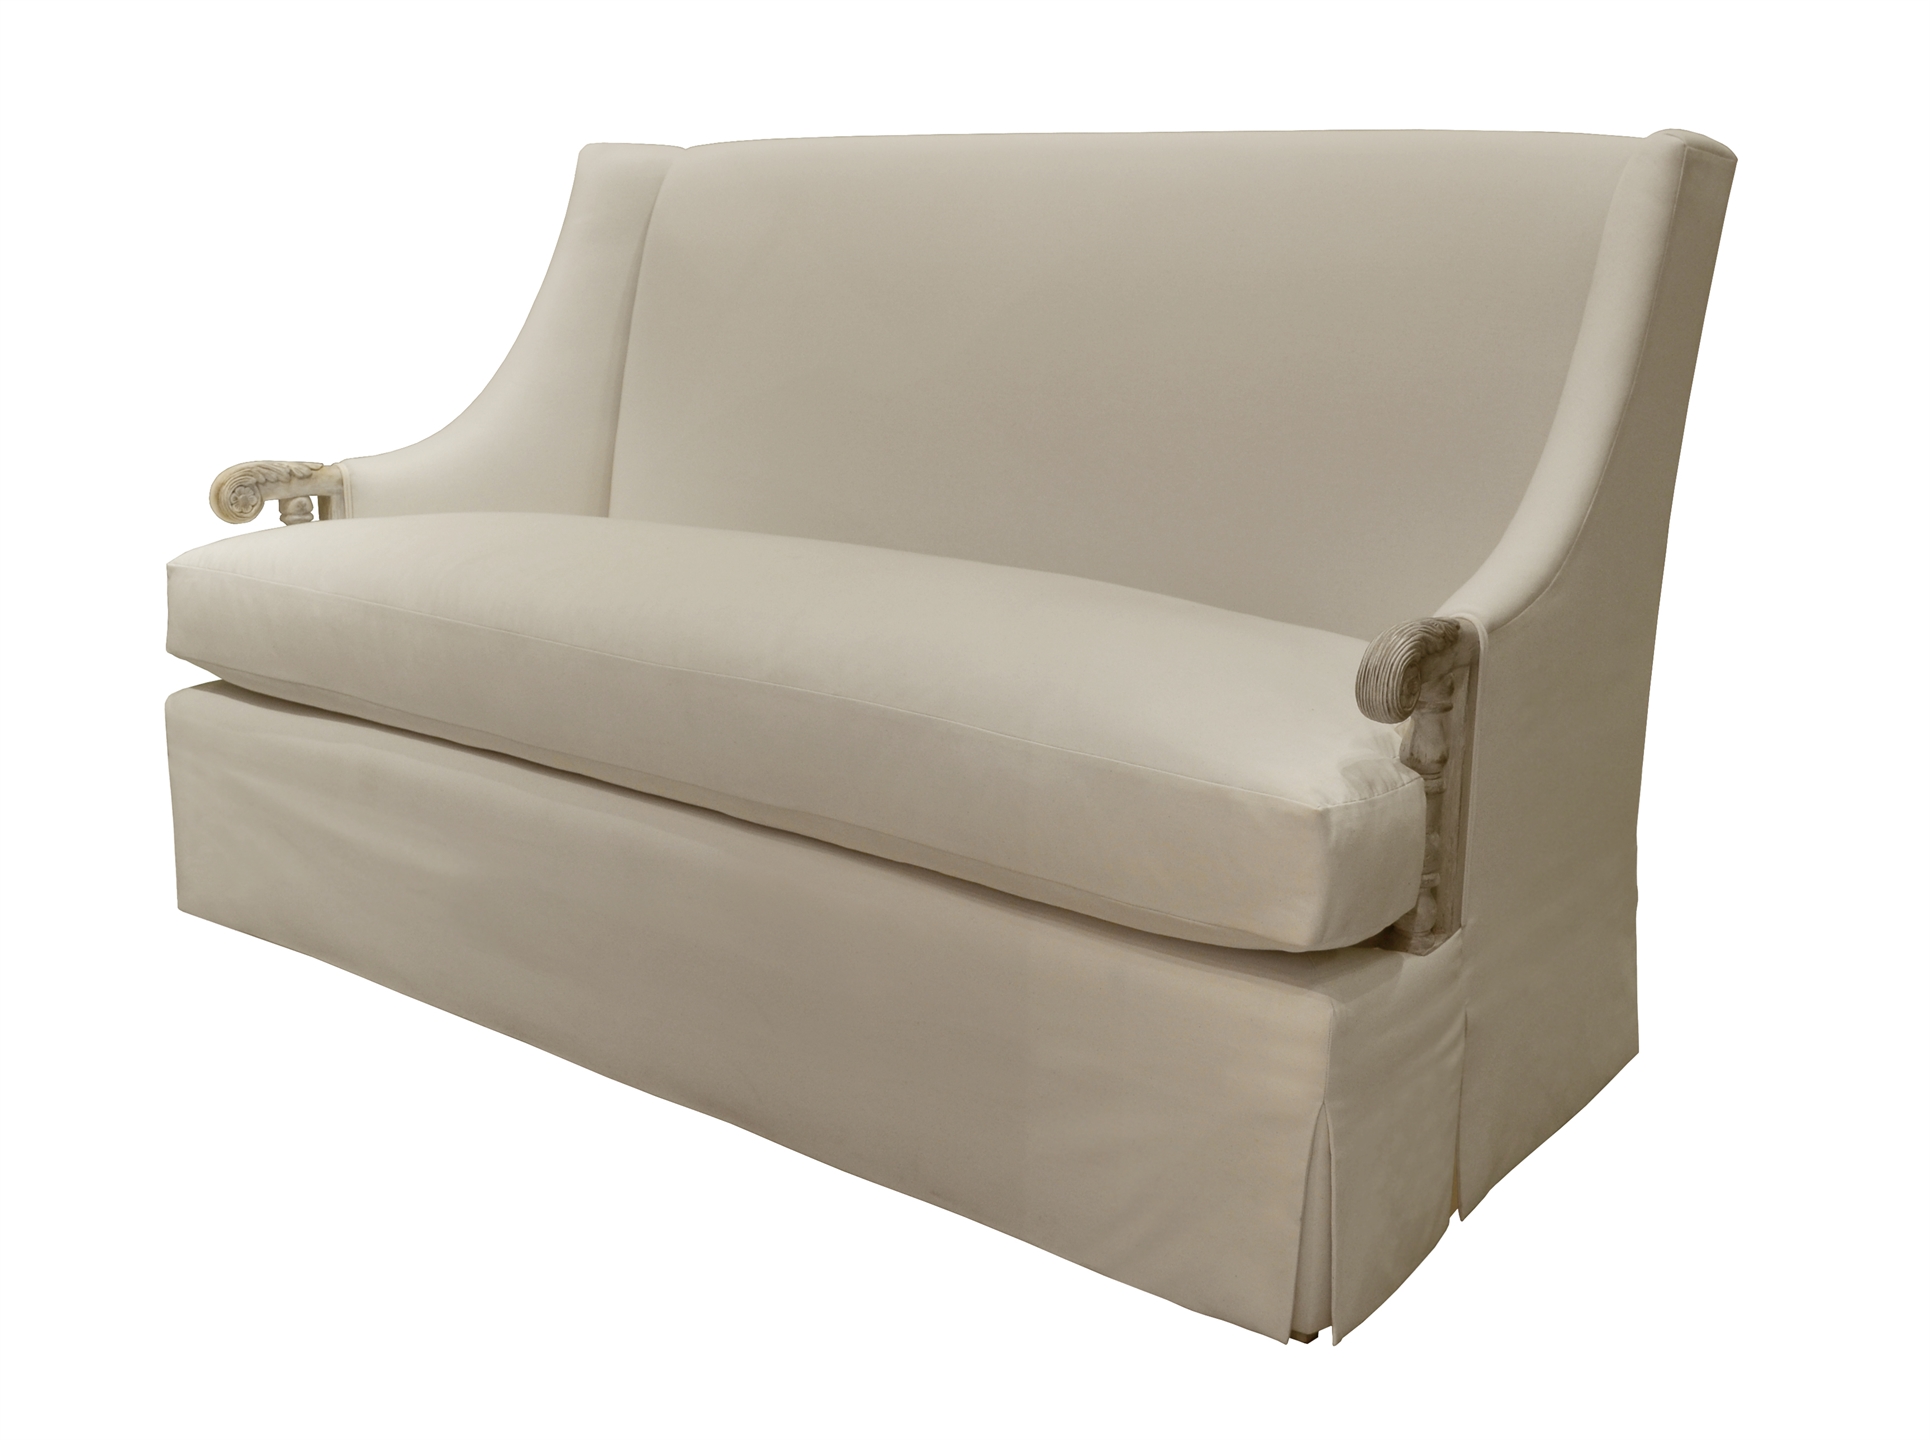 Gascogne Settee with Waterfall Skirt